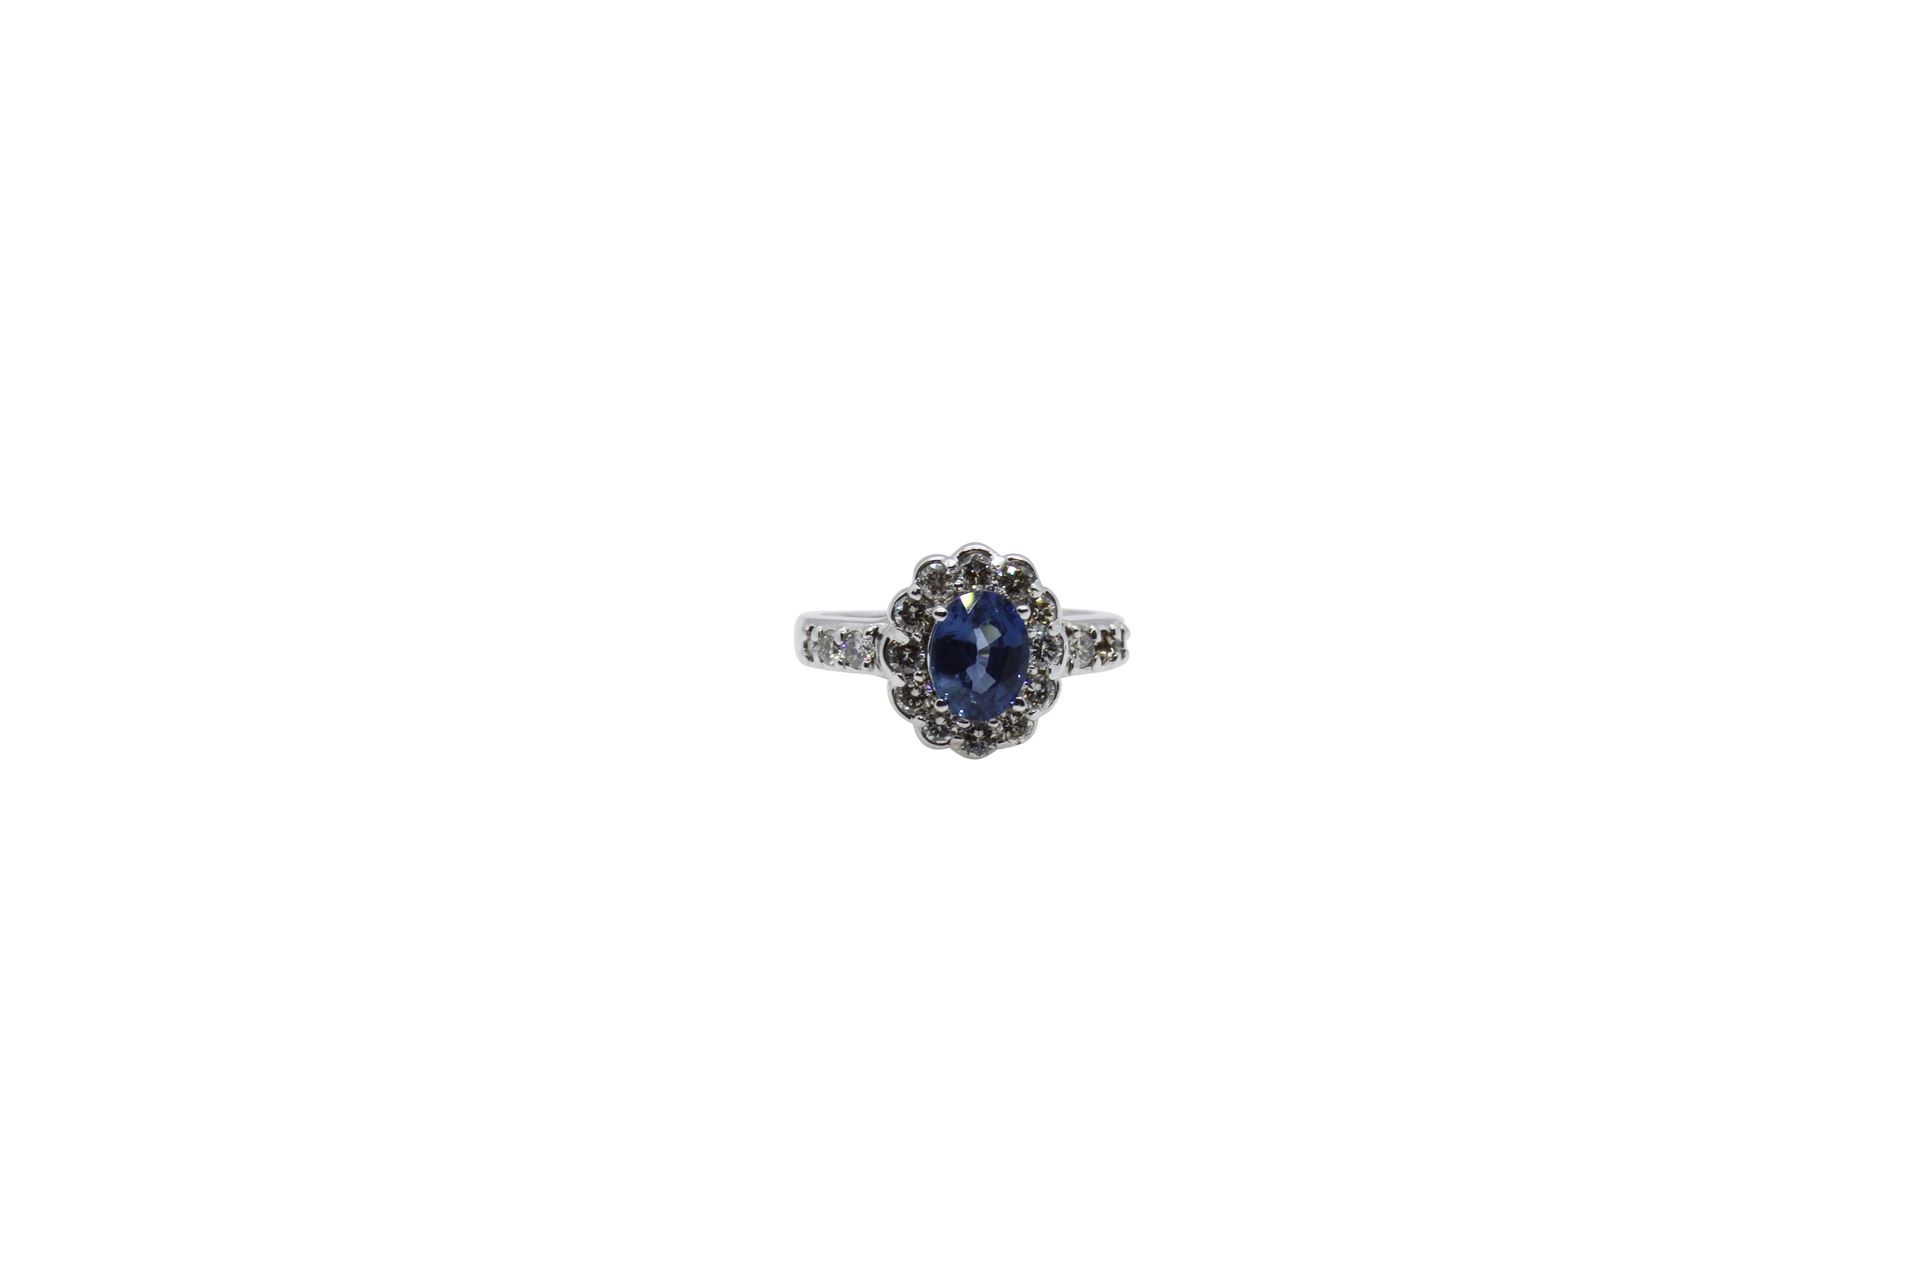 14k gold ring with 1,6ct sapphire and 0.75ct diamonds 14k Goldring mit 1,6ct Sap&hellip;